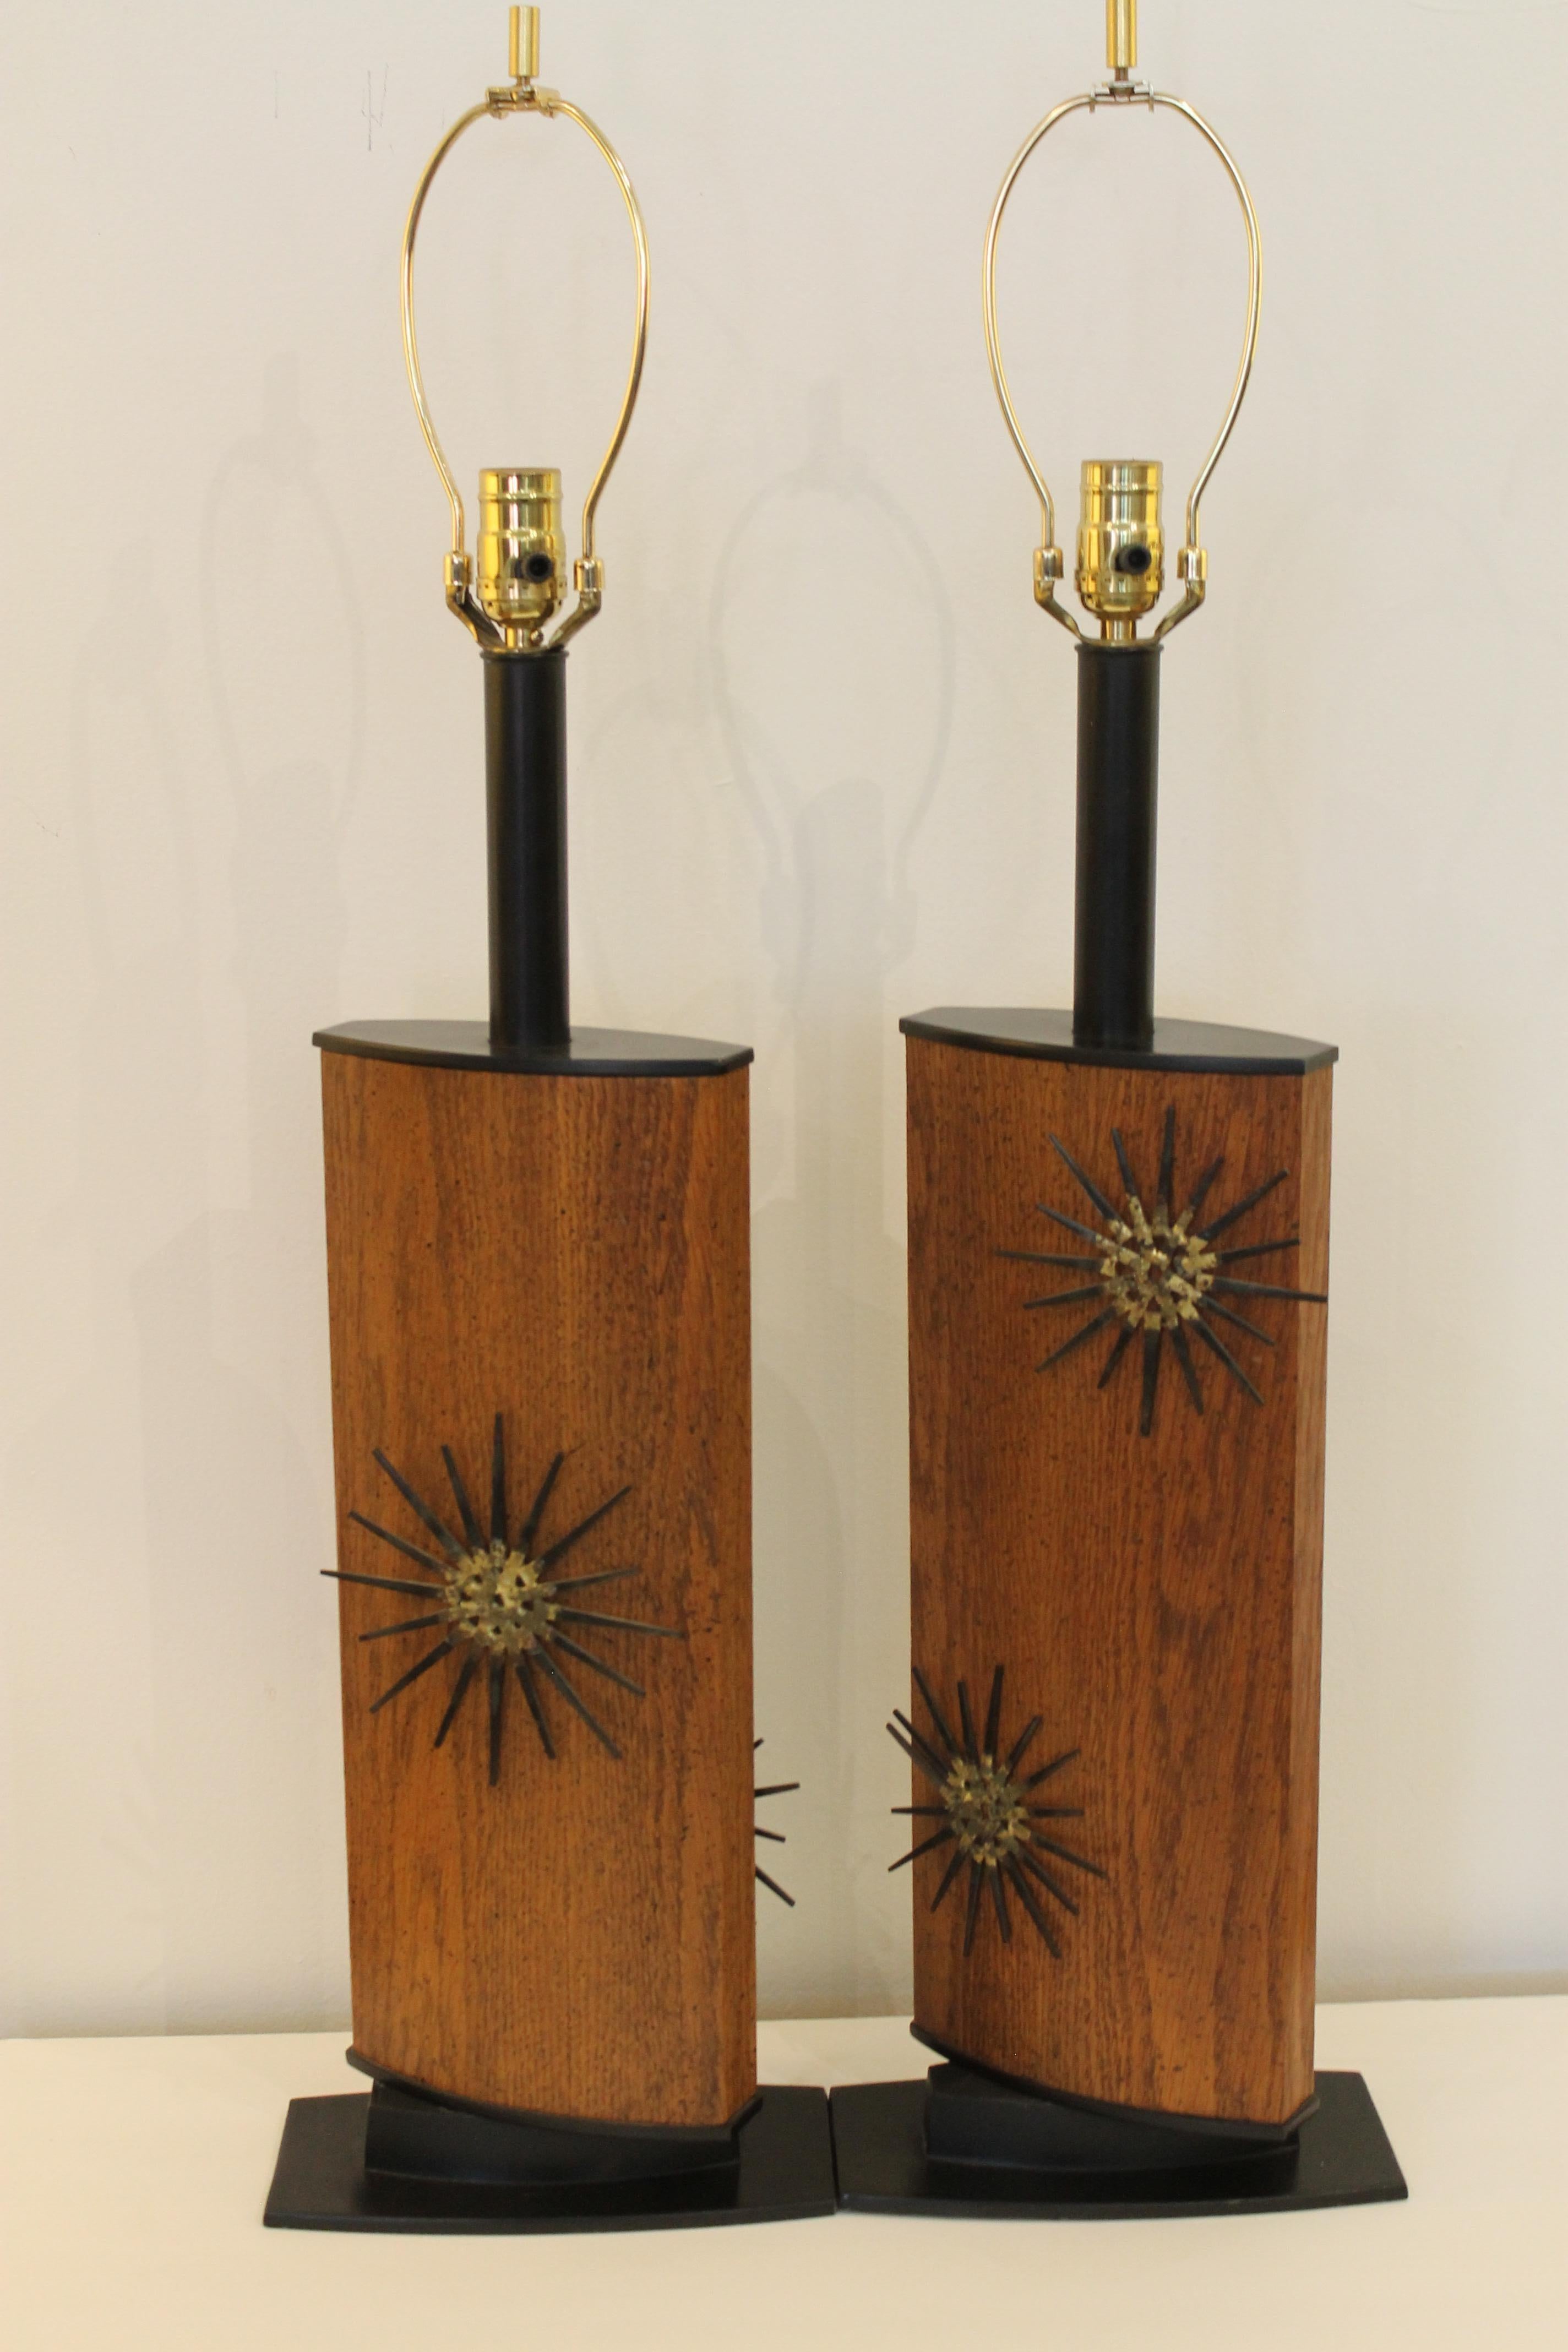 Steel Pair of 1970s Modern Lamps with Nail Art Sunbursts For Sale